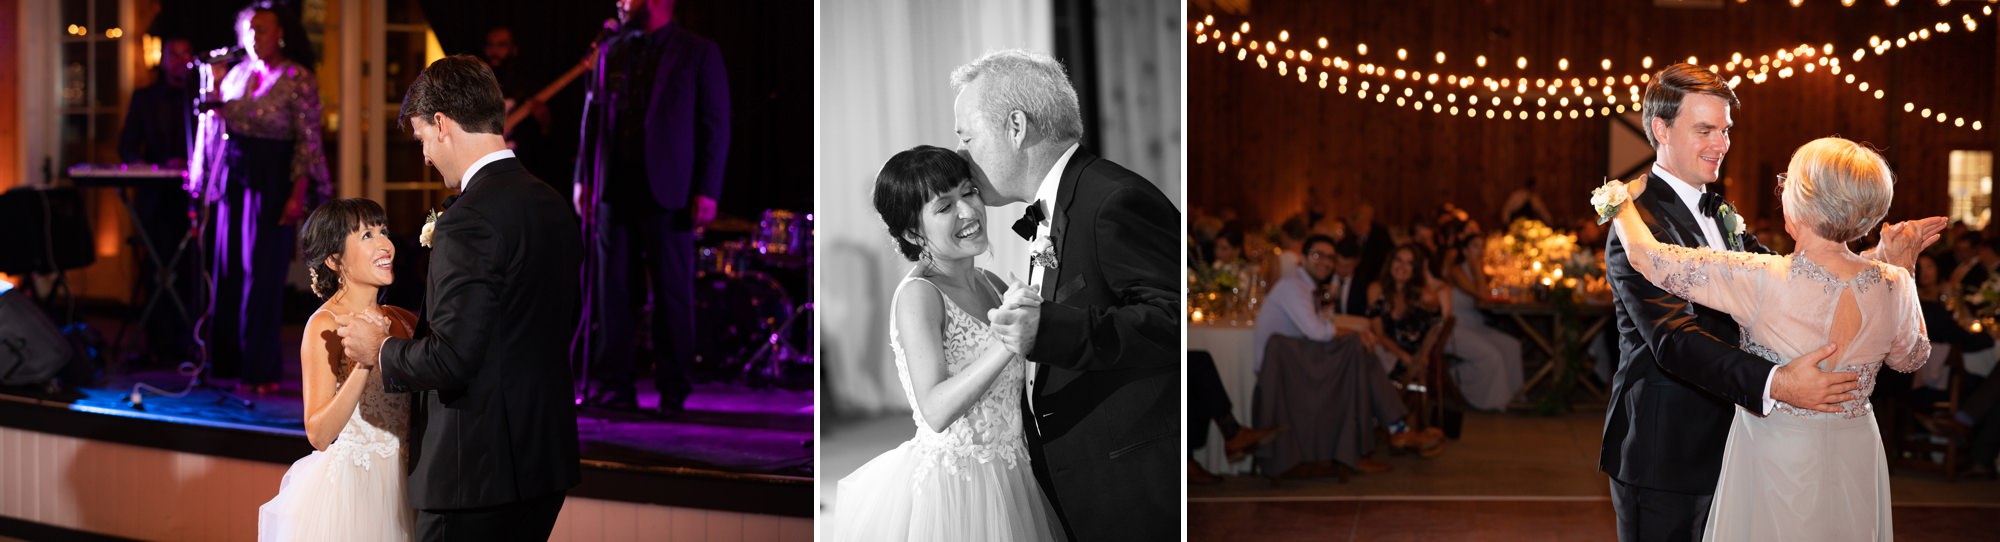 Father Daughter Dance Charlottesville Weddings